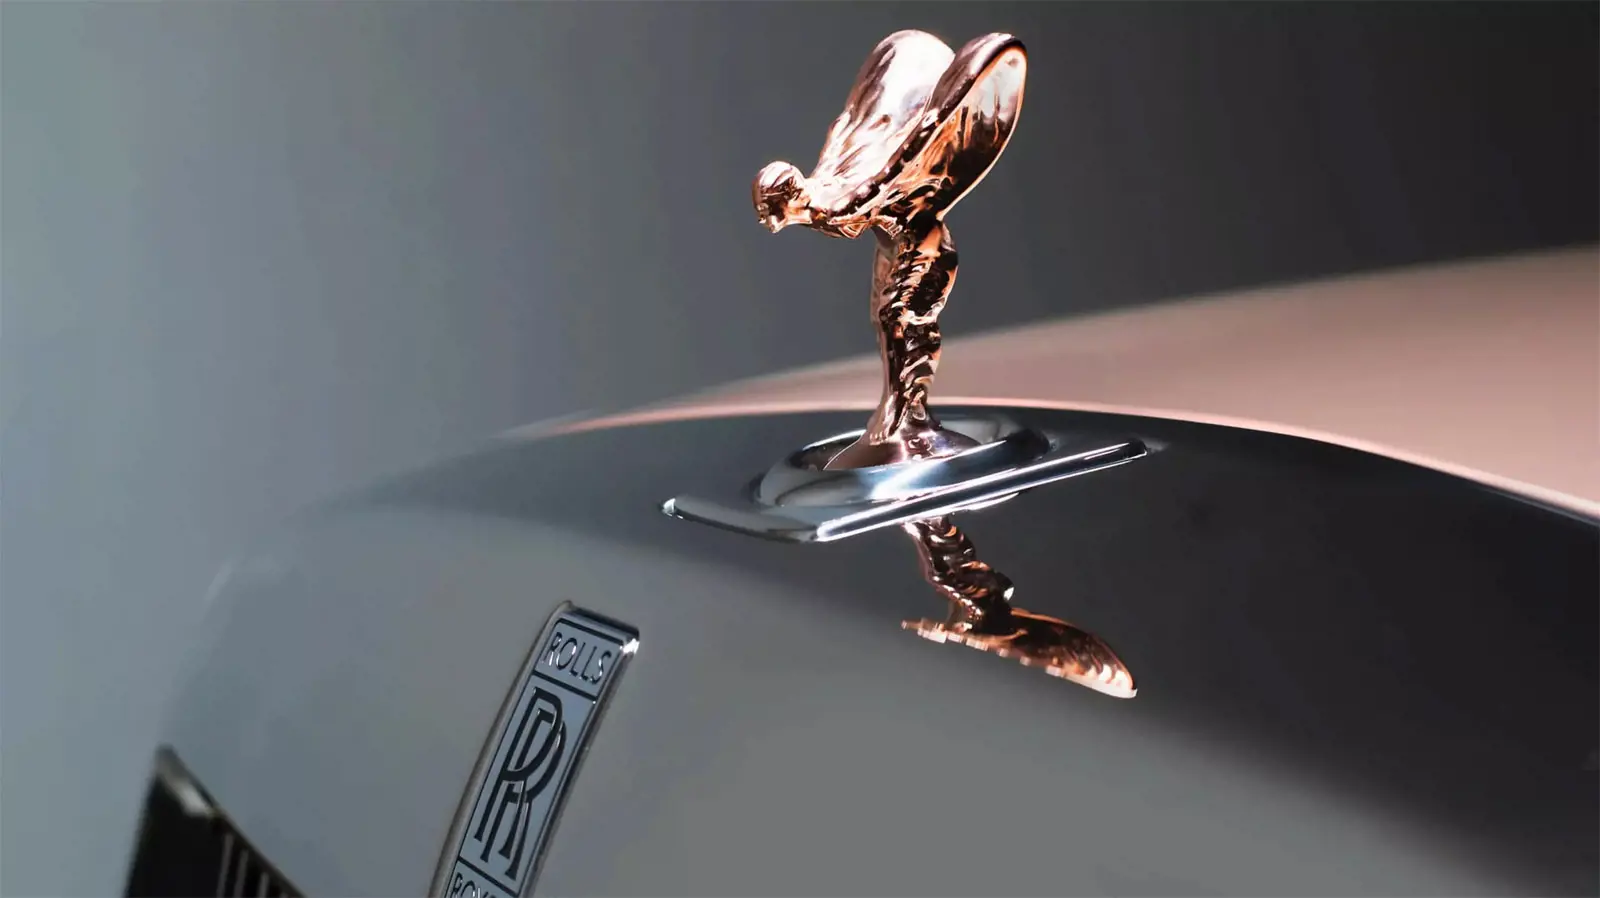 Rolls-Royce Provenance Certified Pre-Owned Cars - The Everlasting Spirit